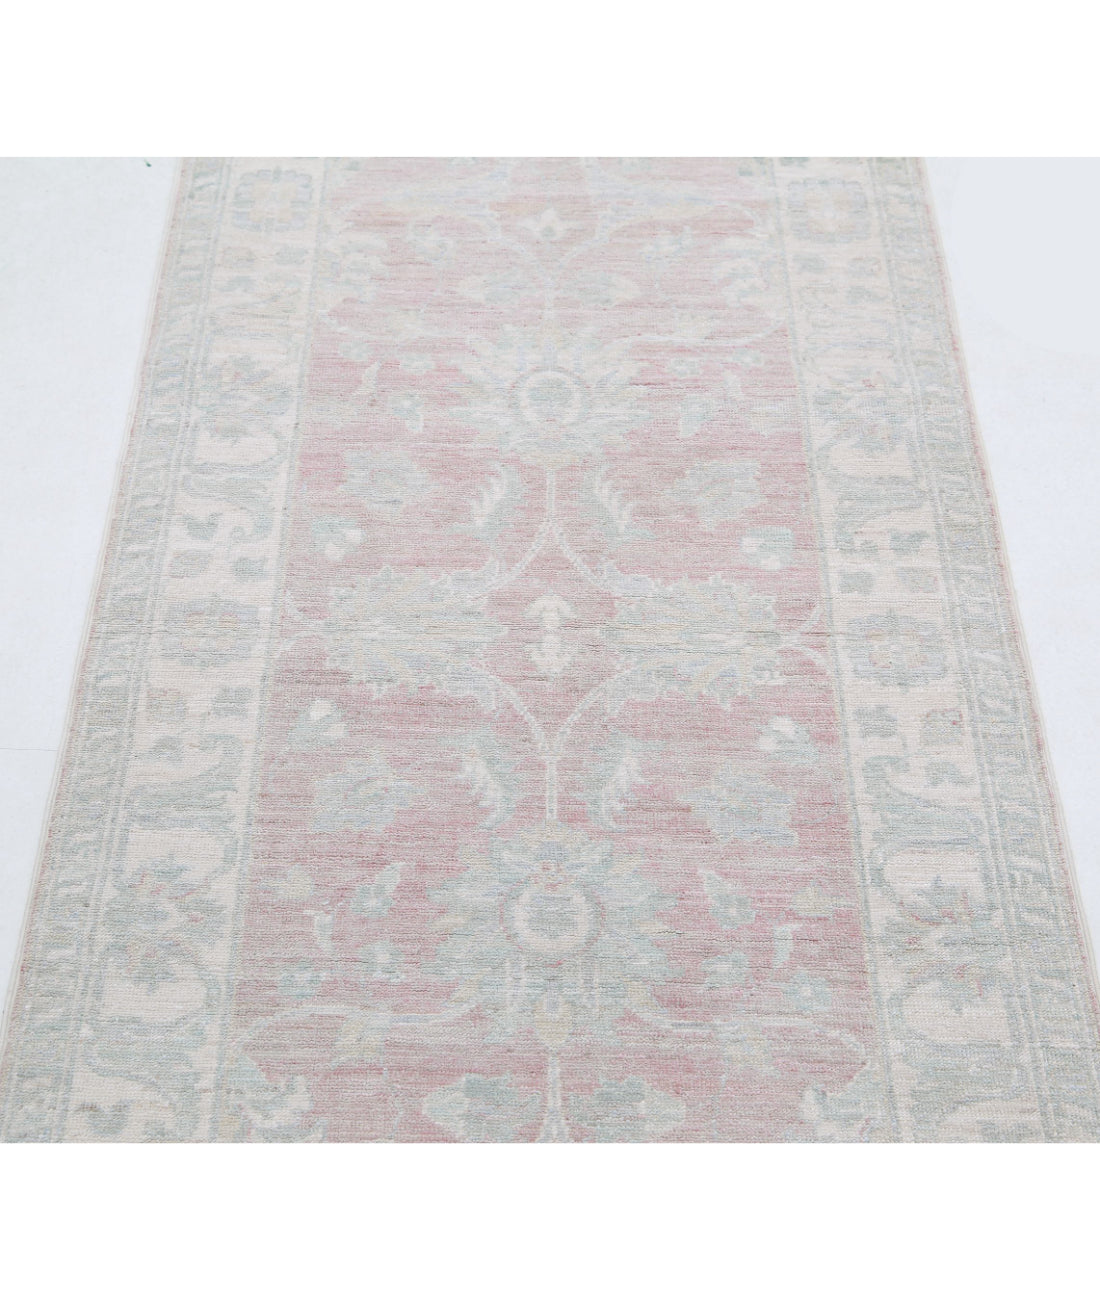 Hand Knotted Serenity Wool Rug - 2'6'' x 8'5'' 2'6'' x 8'5'' (75 X 253) / Pink / Ivory